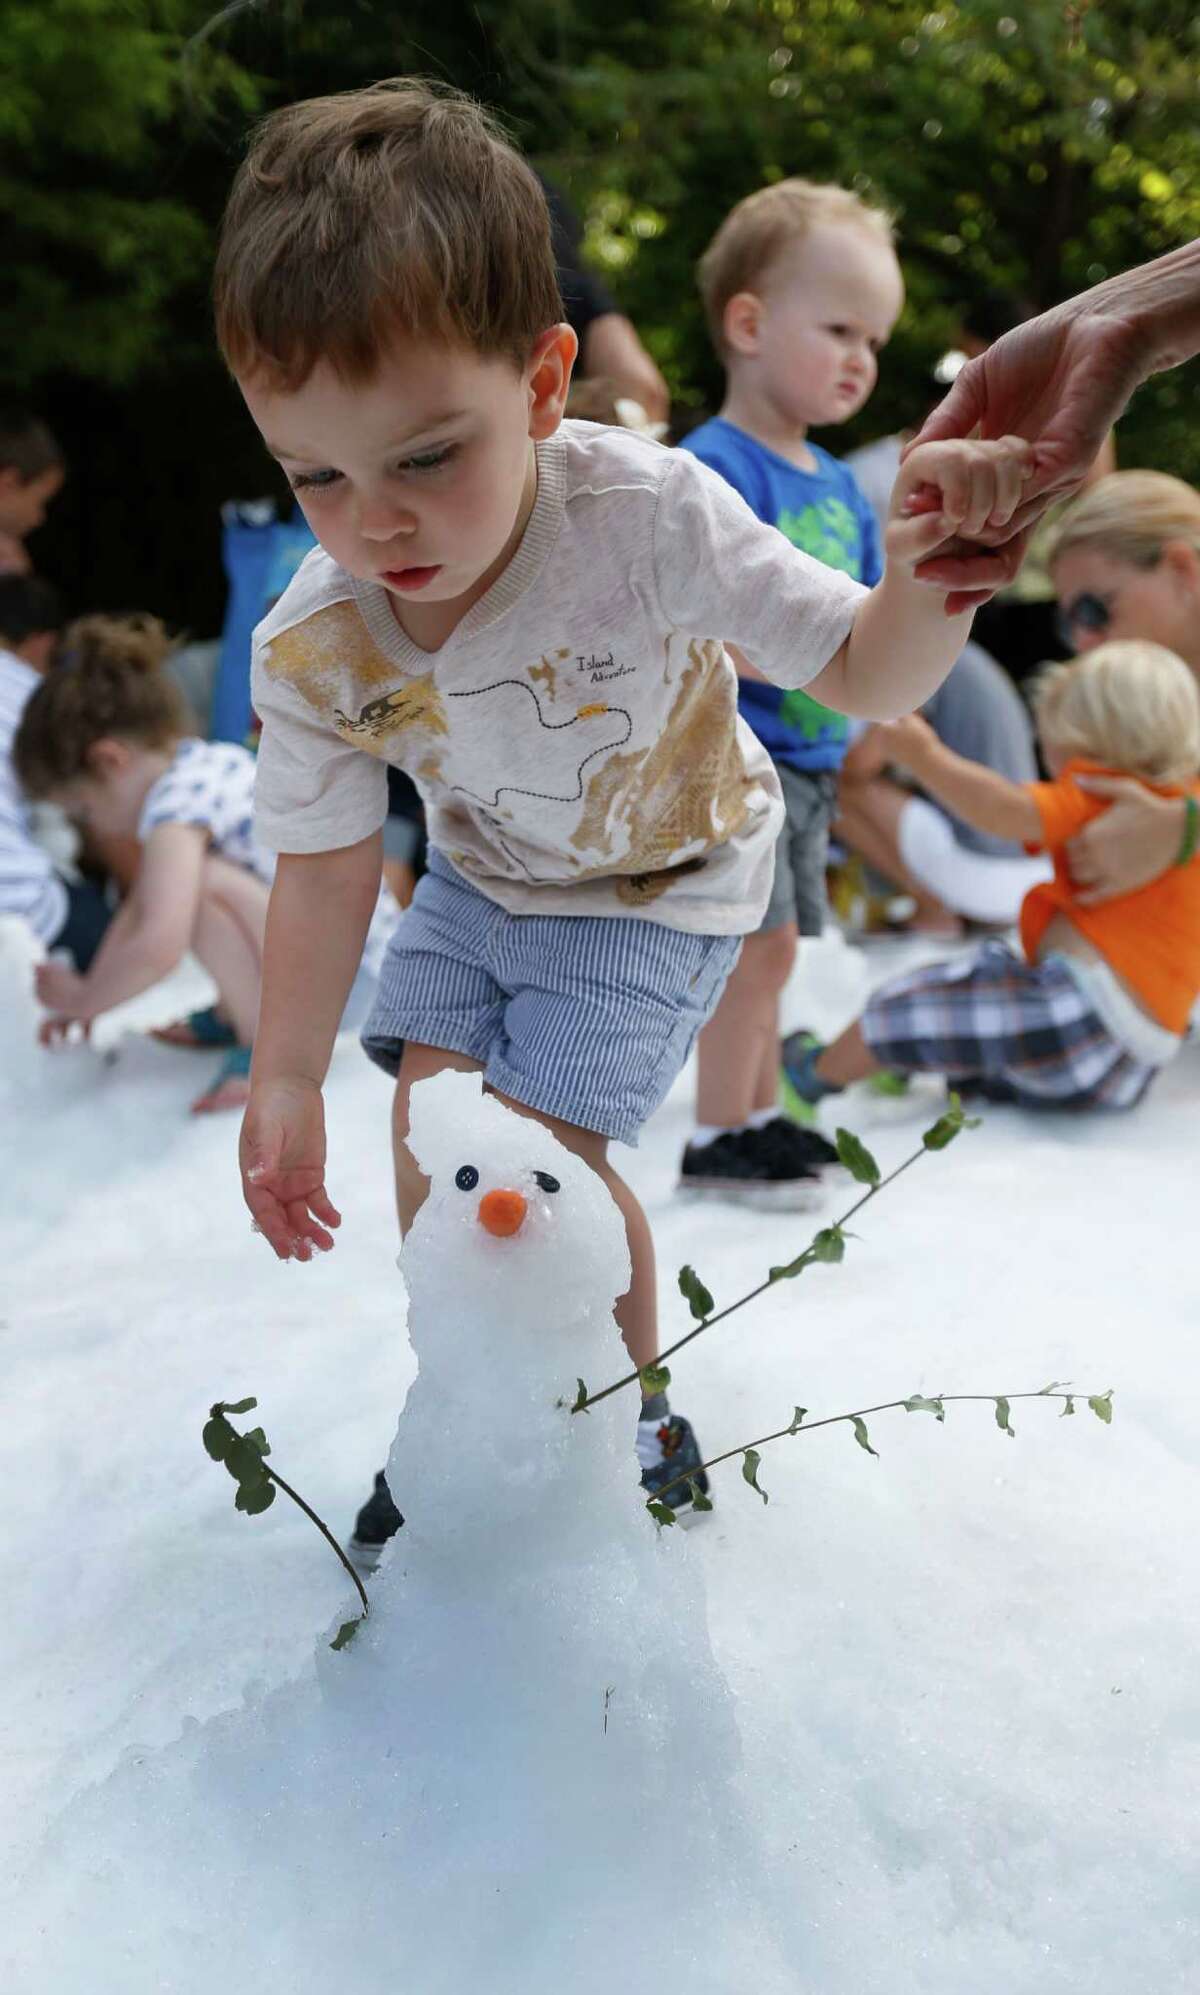 Grayson McMillian, 2 1/2, plays with his snowman in the ice during Snow Day at the Houston Zoo, Saturday, July 16, 2016, in Houston, provided by TXU Energy.